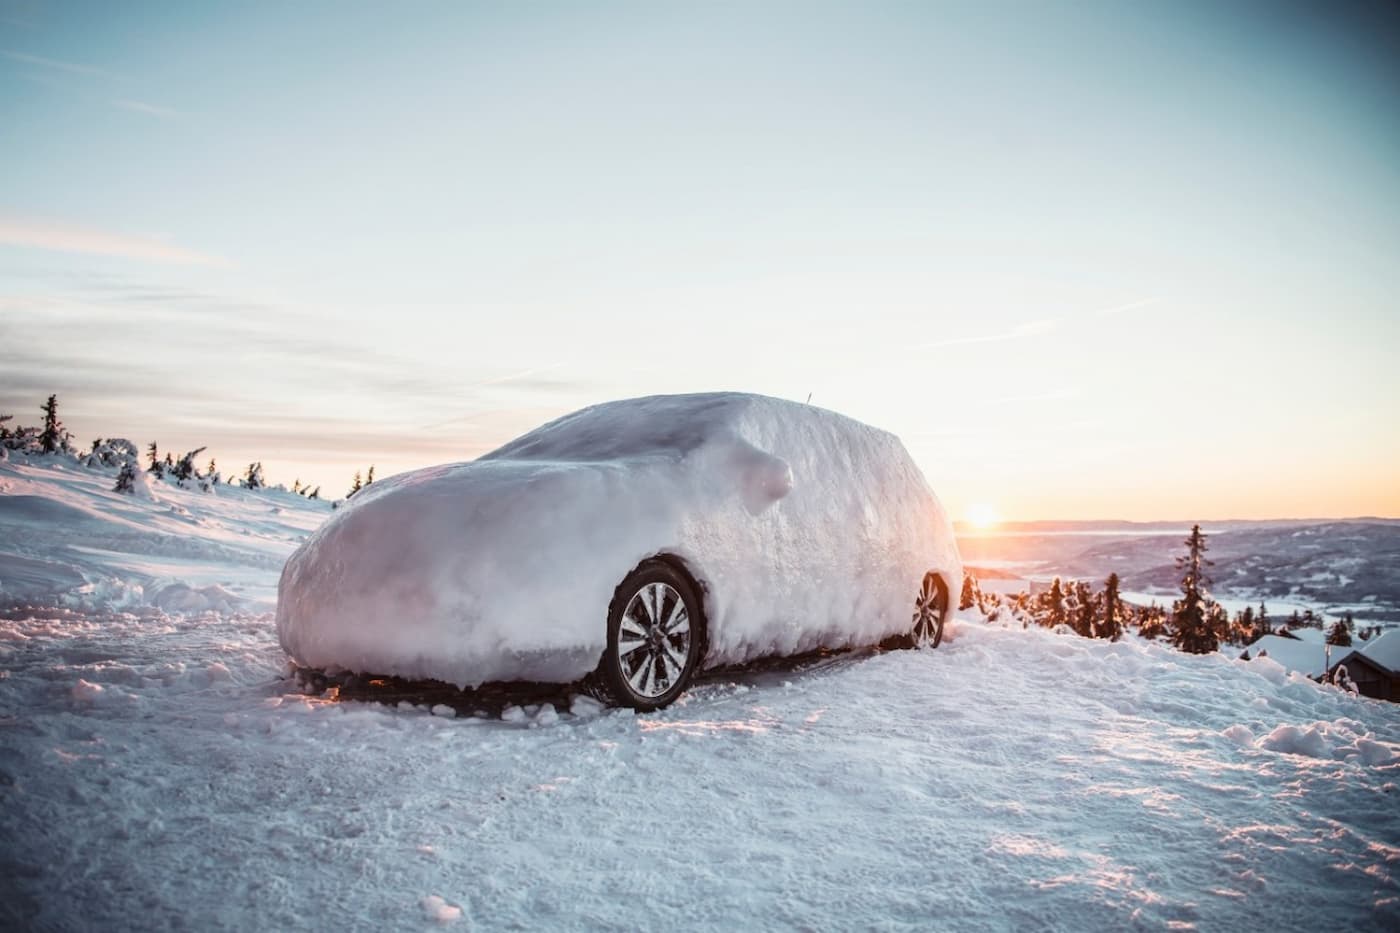 Car covered in snow on a snowy mountain